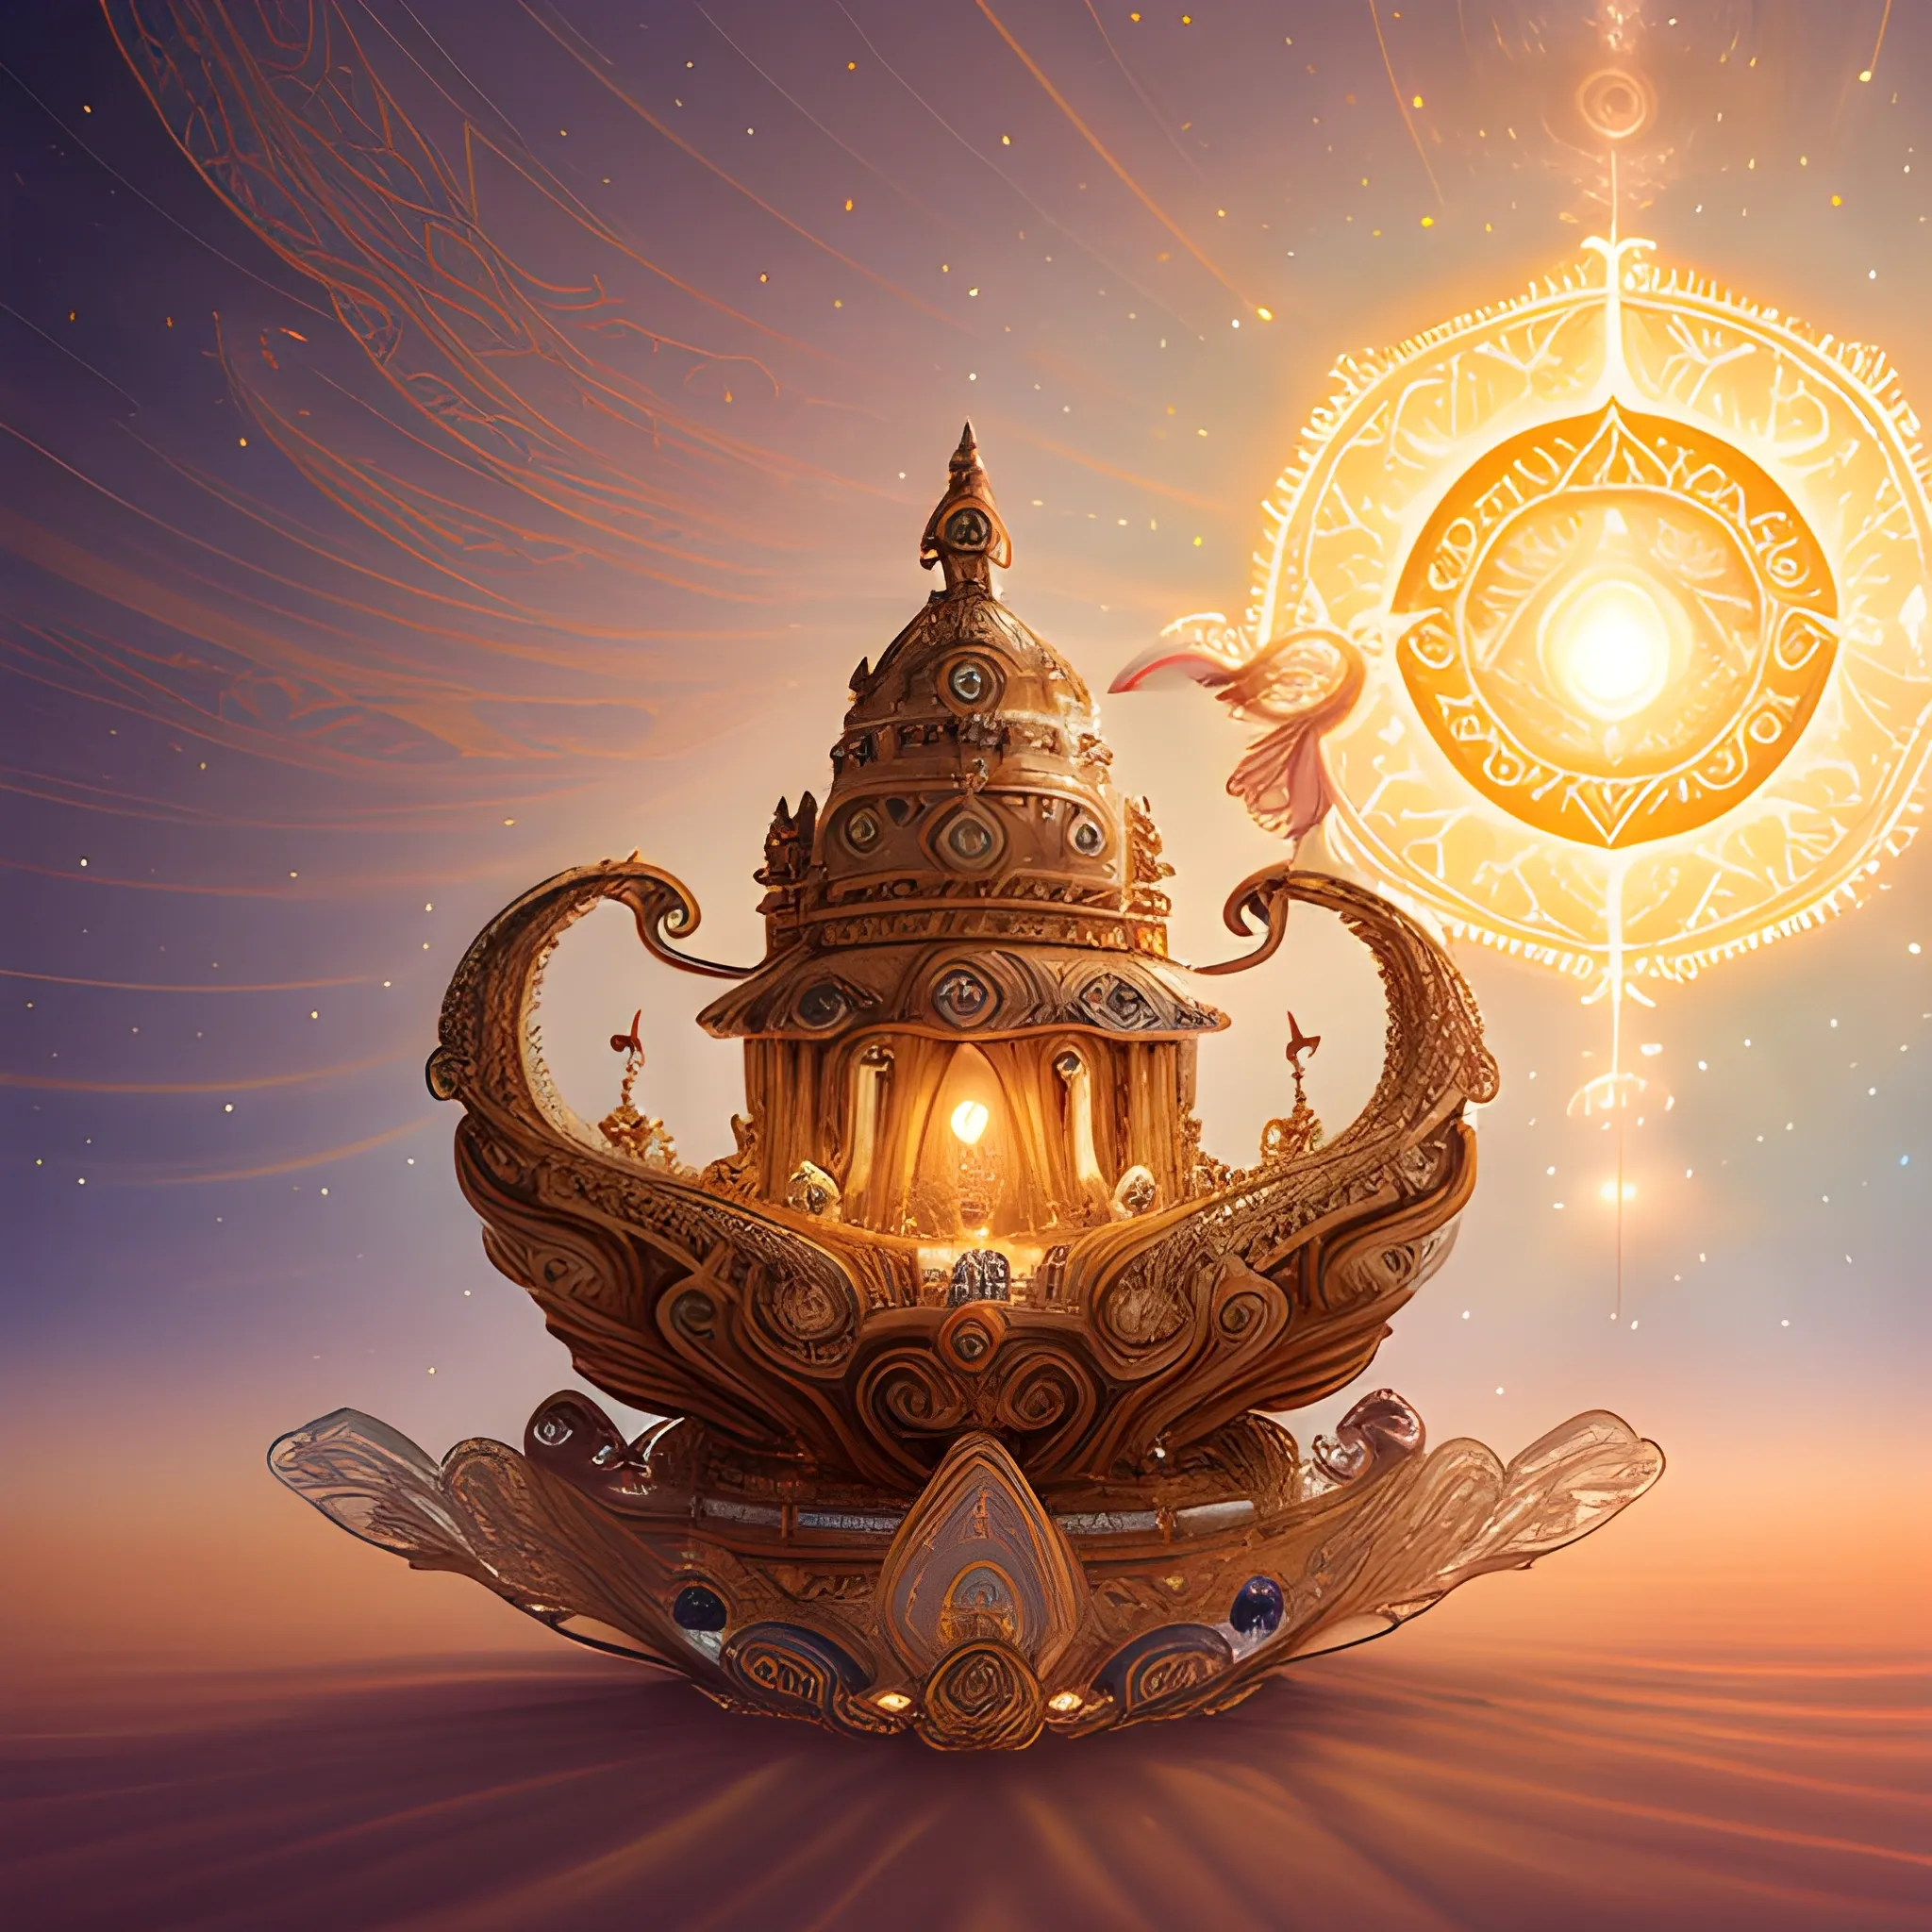 Title: "Celestial Journey: Pushpaka Vimana"

Description:
Amidst an ethereal sky filled with wisps of celestial hues, a majestic Pushpaka Vimana soars gracefully, its intricate details shining with divine luminescence. The background shimmers with spiritual energy, hinting at the realms beyond mortal sight.

The Pushpaka Vimana itself is a marvel to behold, adorned with intricate carvings and flowing patterns that seem to dance with the wind. Its form is both ancient and futuristic, embodying the mystique of a celestial chariot.

Within the heart of the Vimana stands a solitary soul, bathed in a radiant white light that emanates from every corner of this divine vehicle. The figure exudes tranquility and wisdom, a beacon of enlightenment amidst the celestial journey.

The entire scene is enveloped in a soft, all-encompassing glow of white divine light, casting a sense of peace and serenity upon the viewer. It is a glimpse into a realm where the material and spiritual intertwine, where the ancient Pushpaka Vimana carries souls on their transcendent voyage through the cosmos.